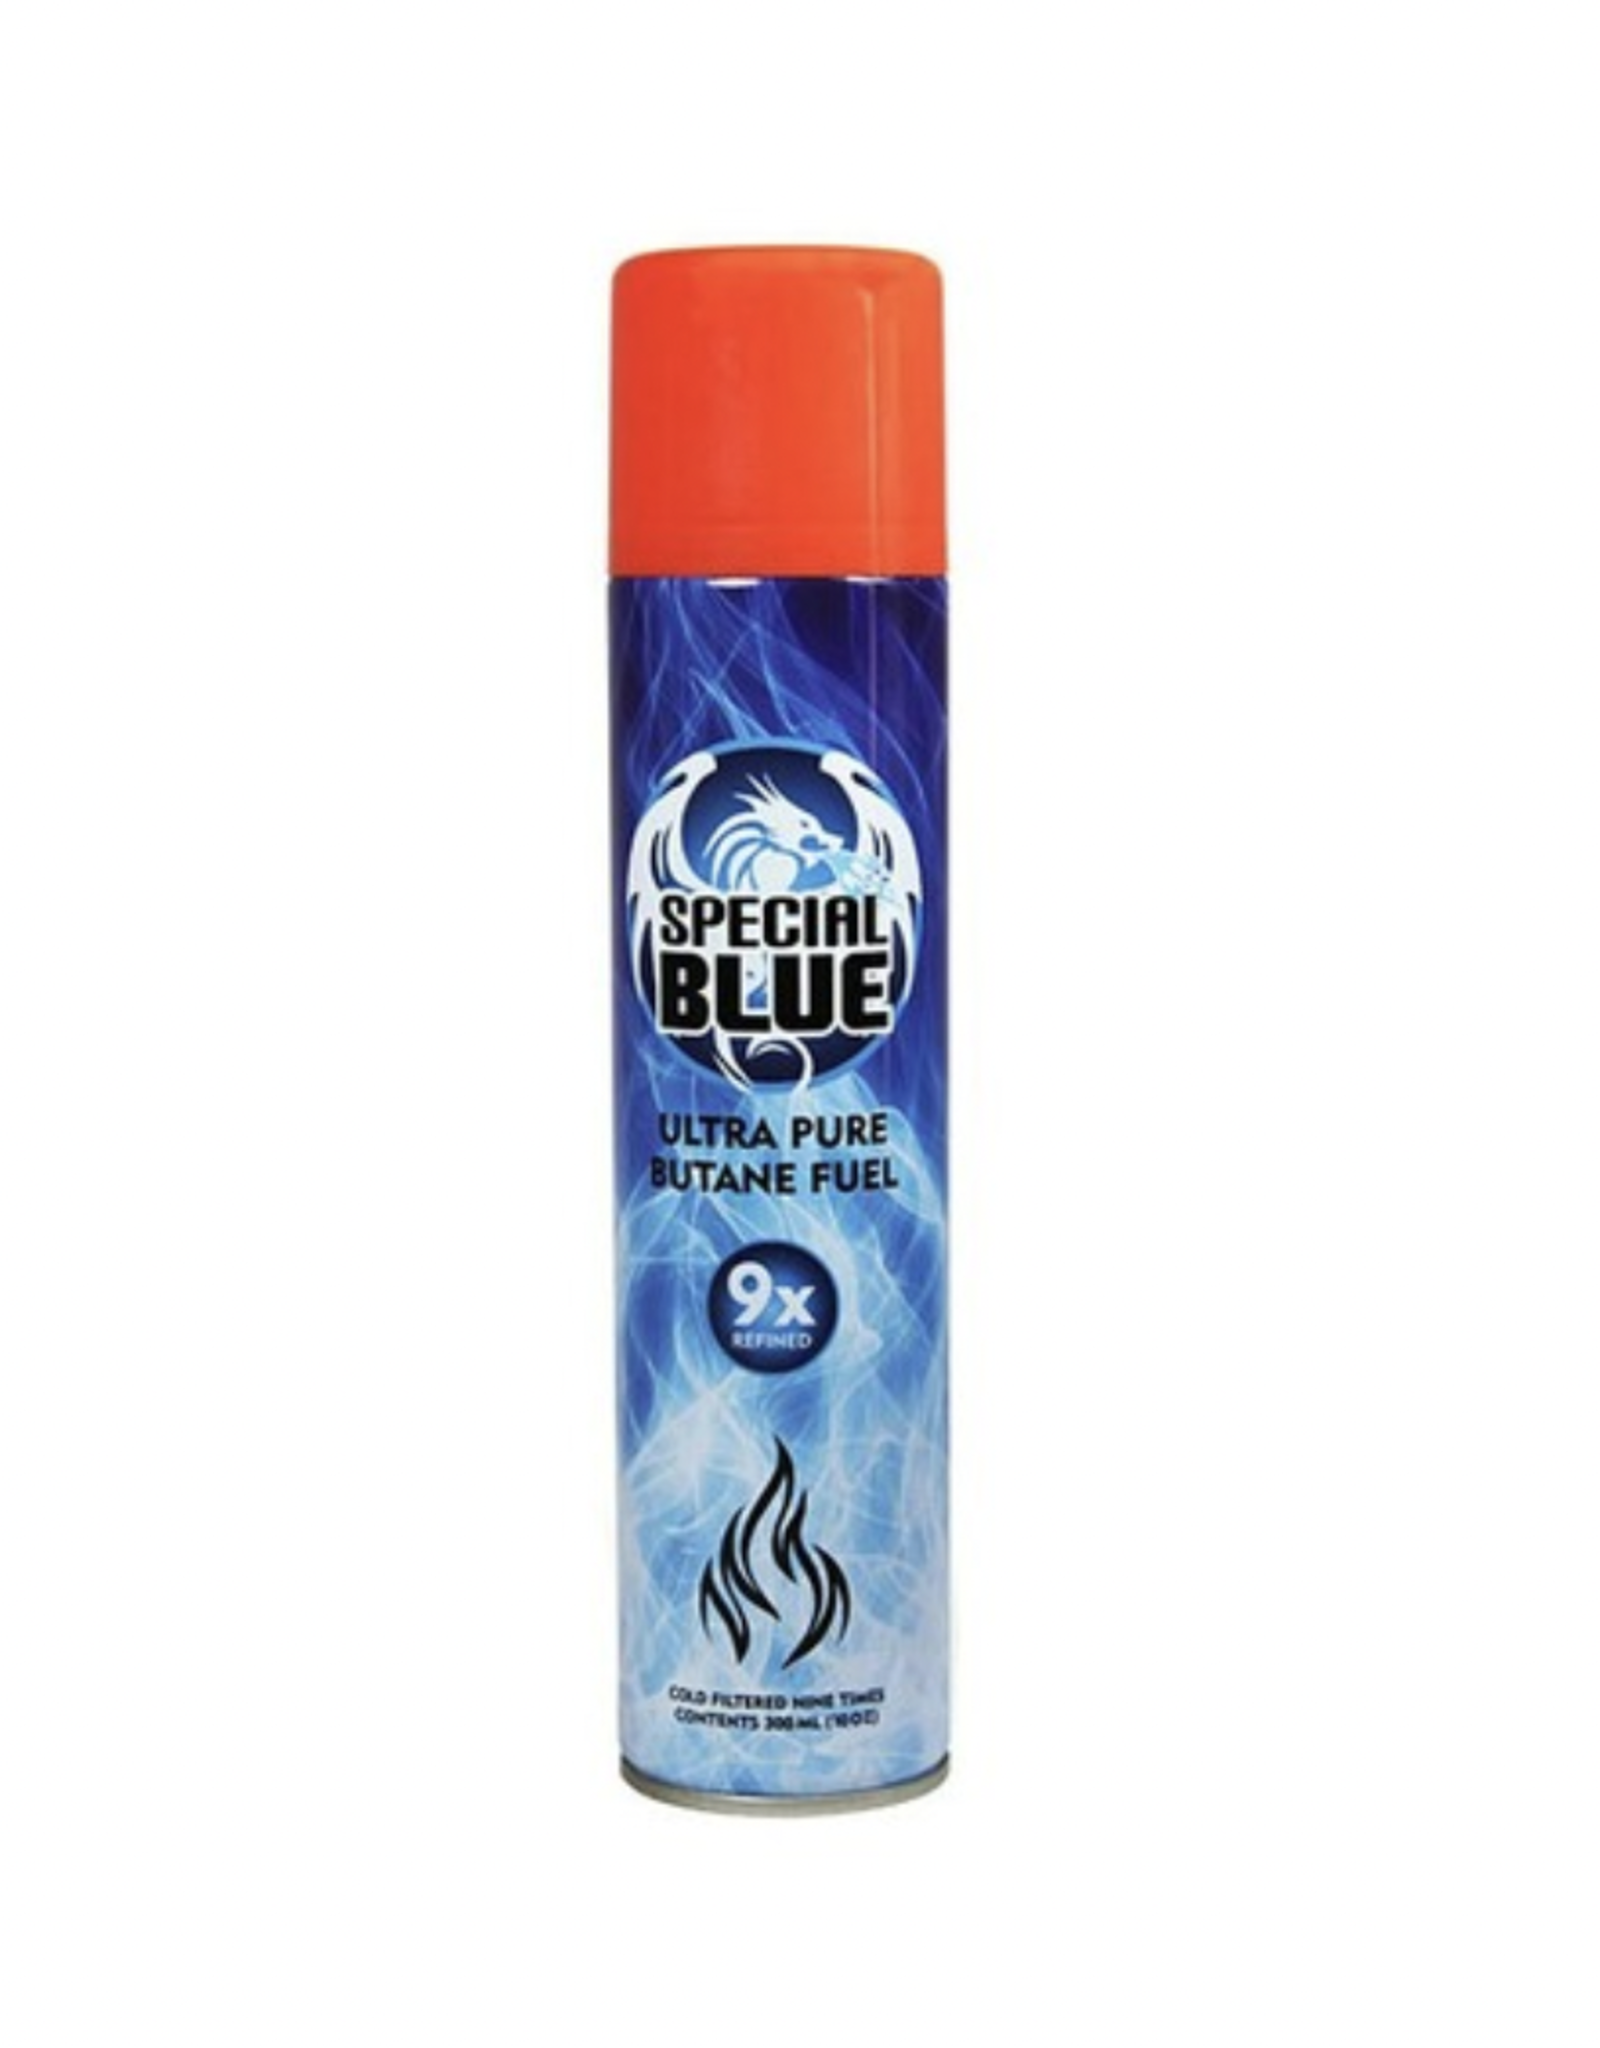 Special Blue 9x Butane *Not Available for Shipping*